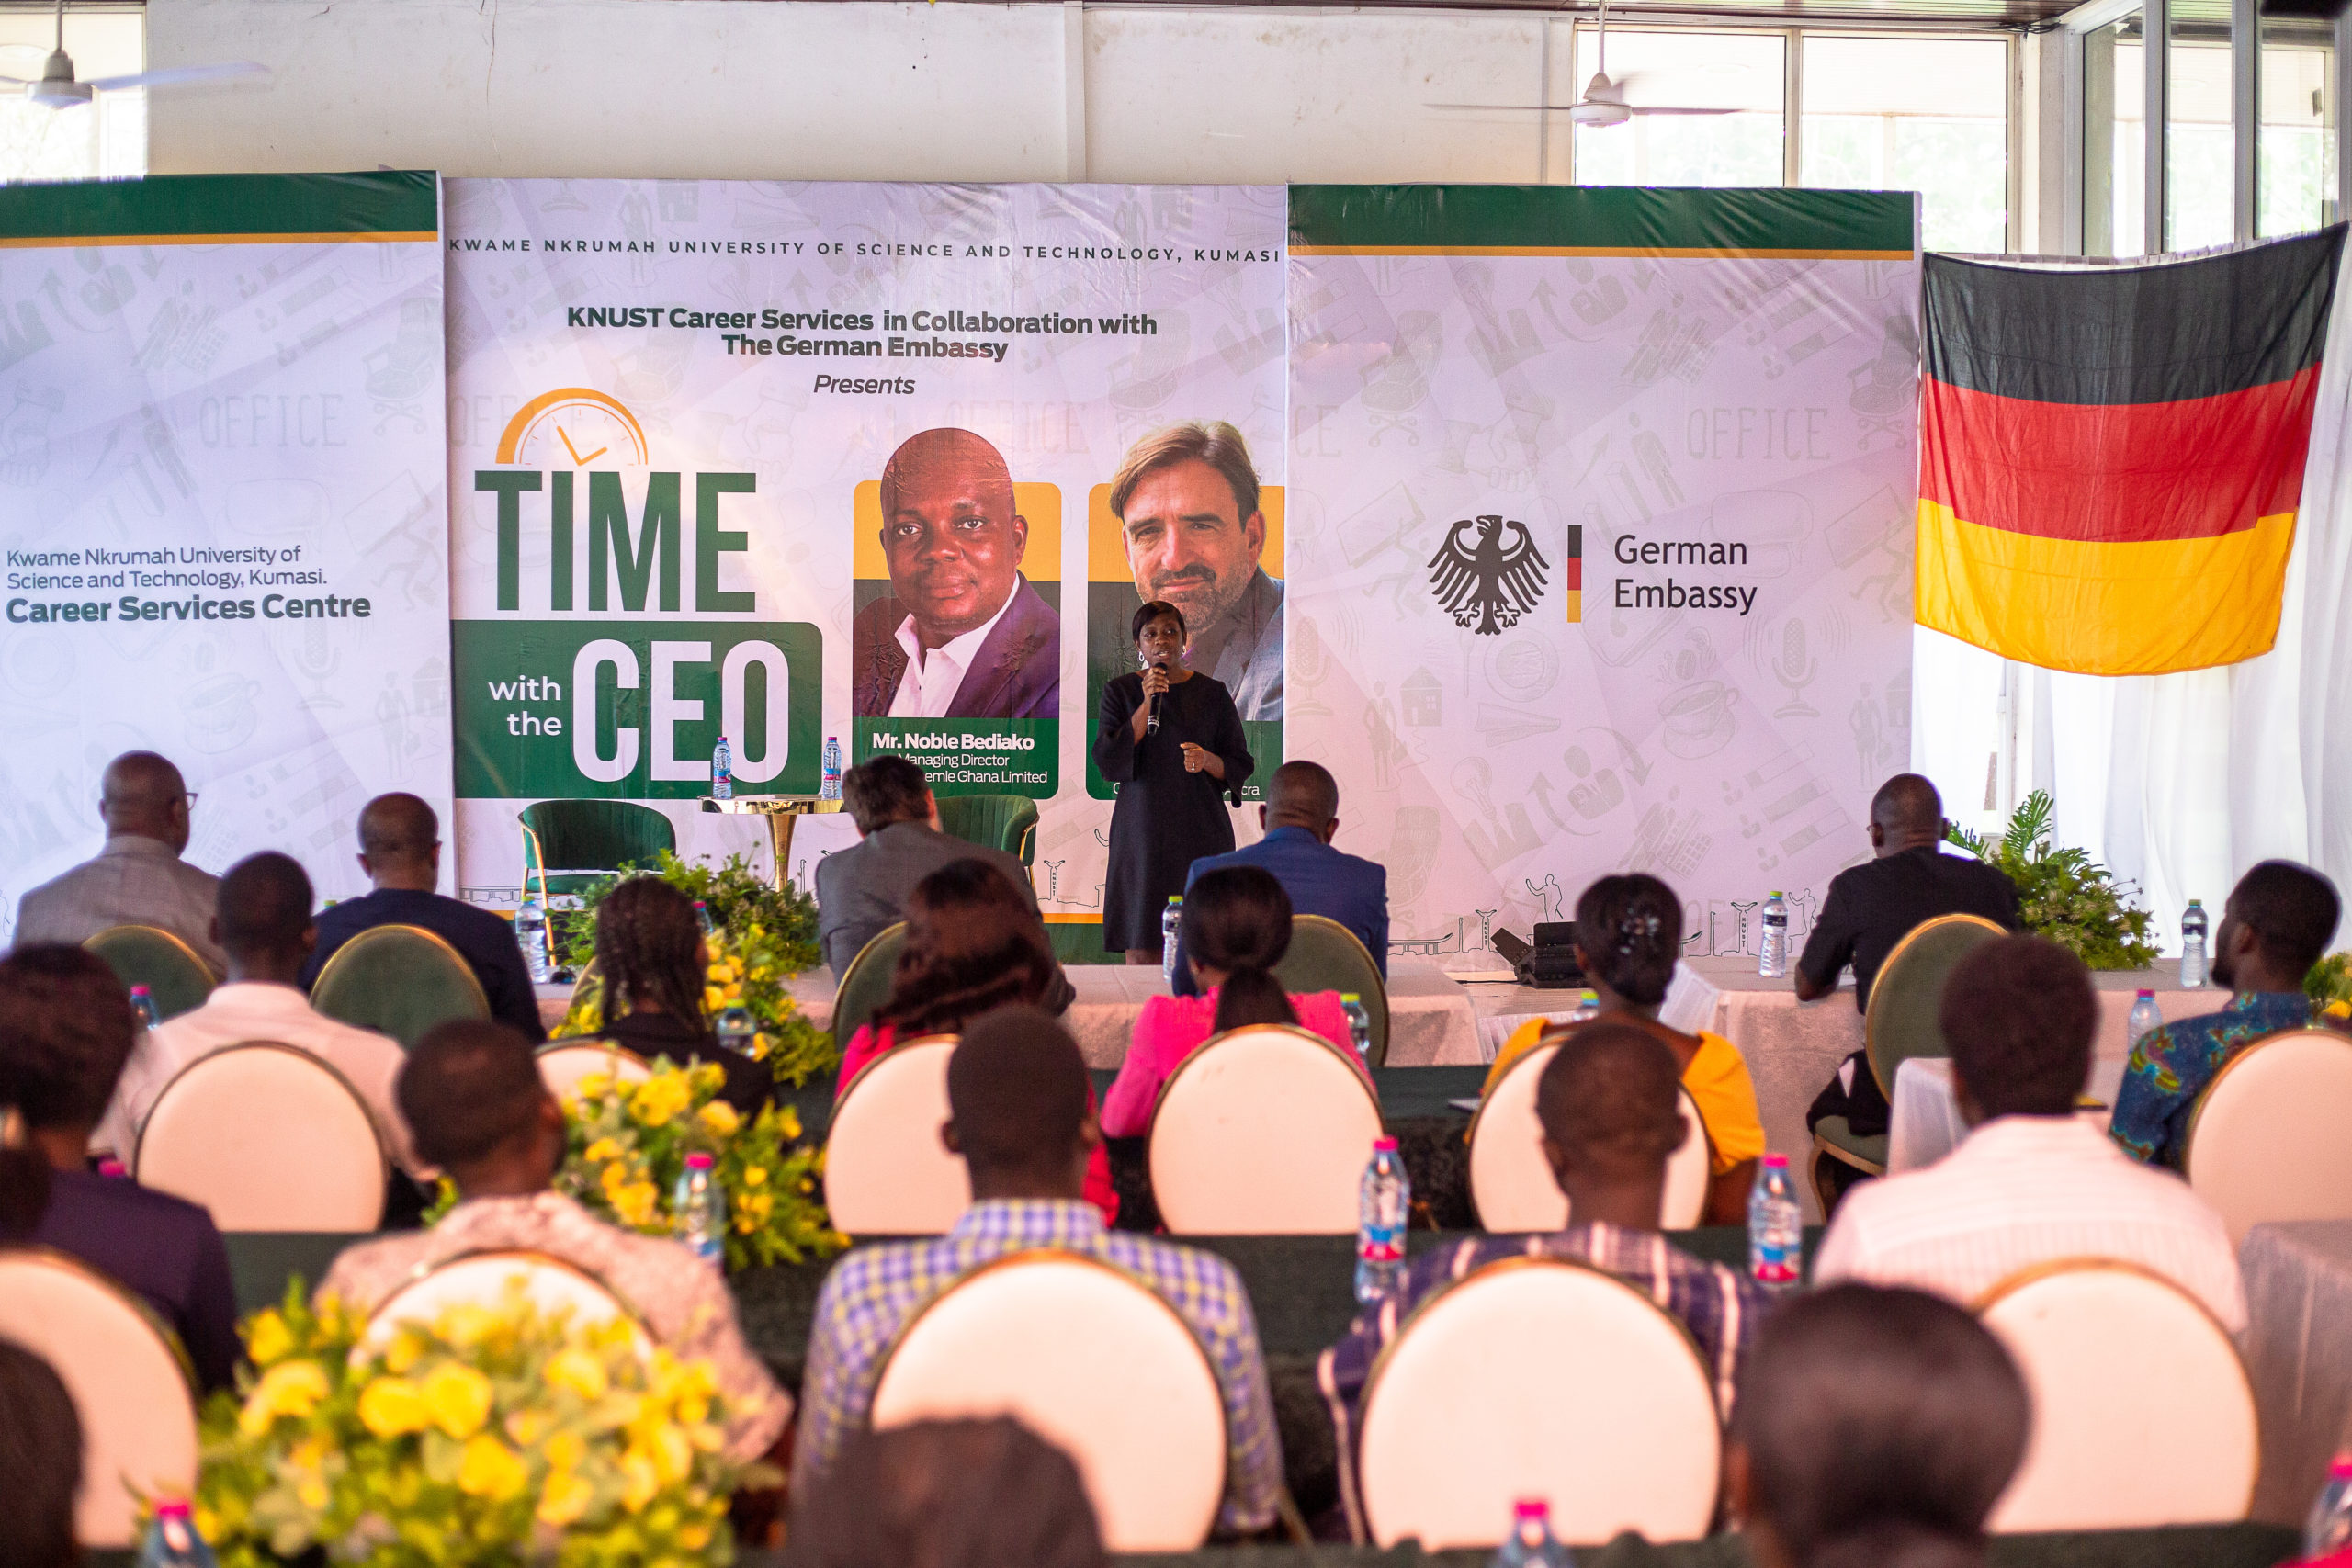 KNUST Career Services Centre partners with German Embassy to Host Time with the CEOs [Video]